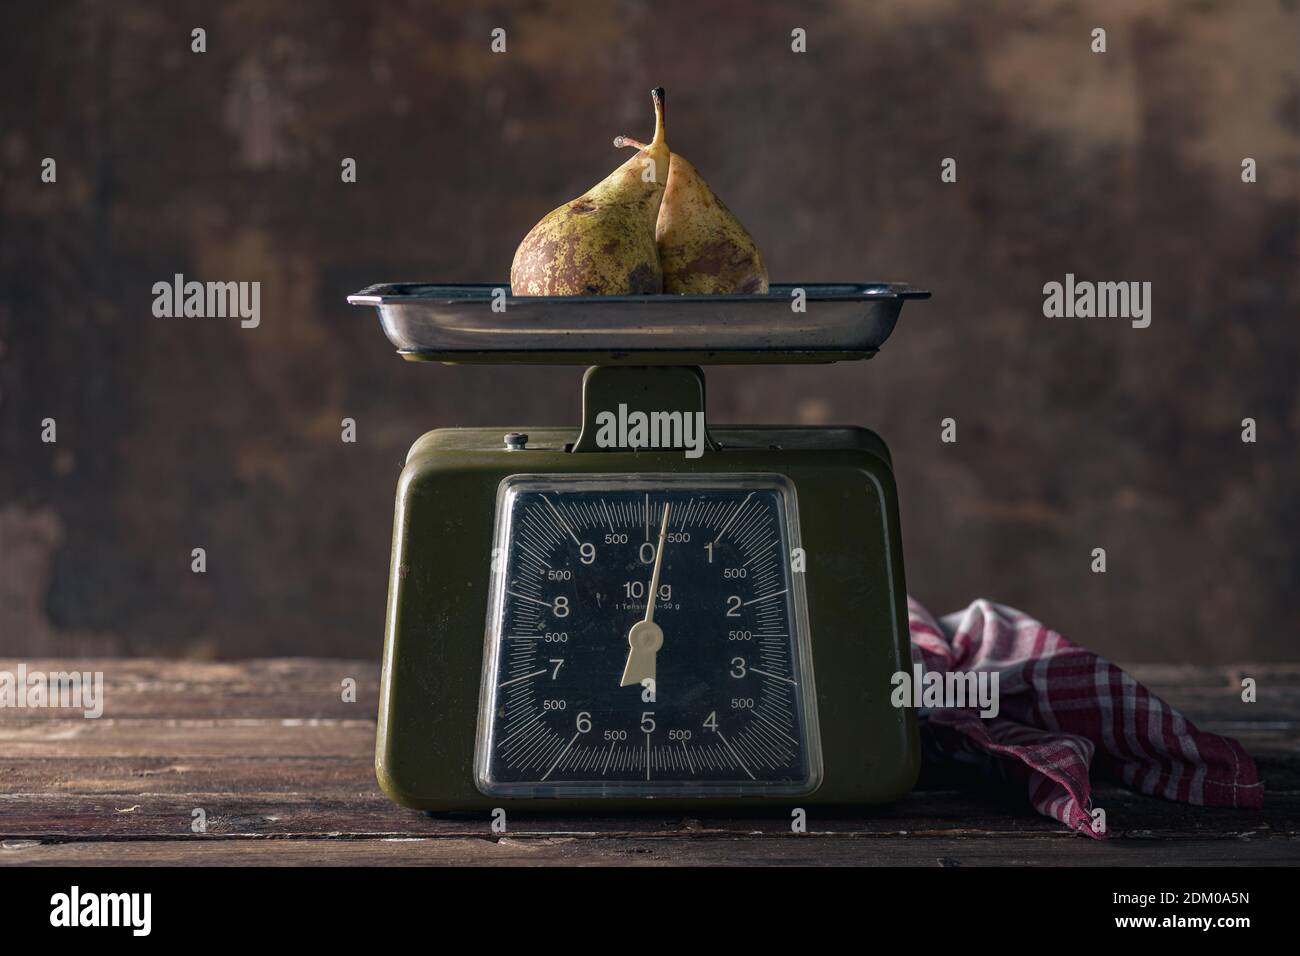 Vintage Scales on Wooden Table with Pears Stock Photo